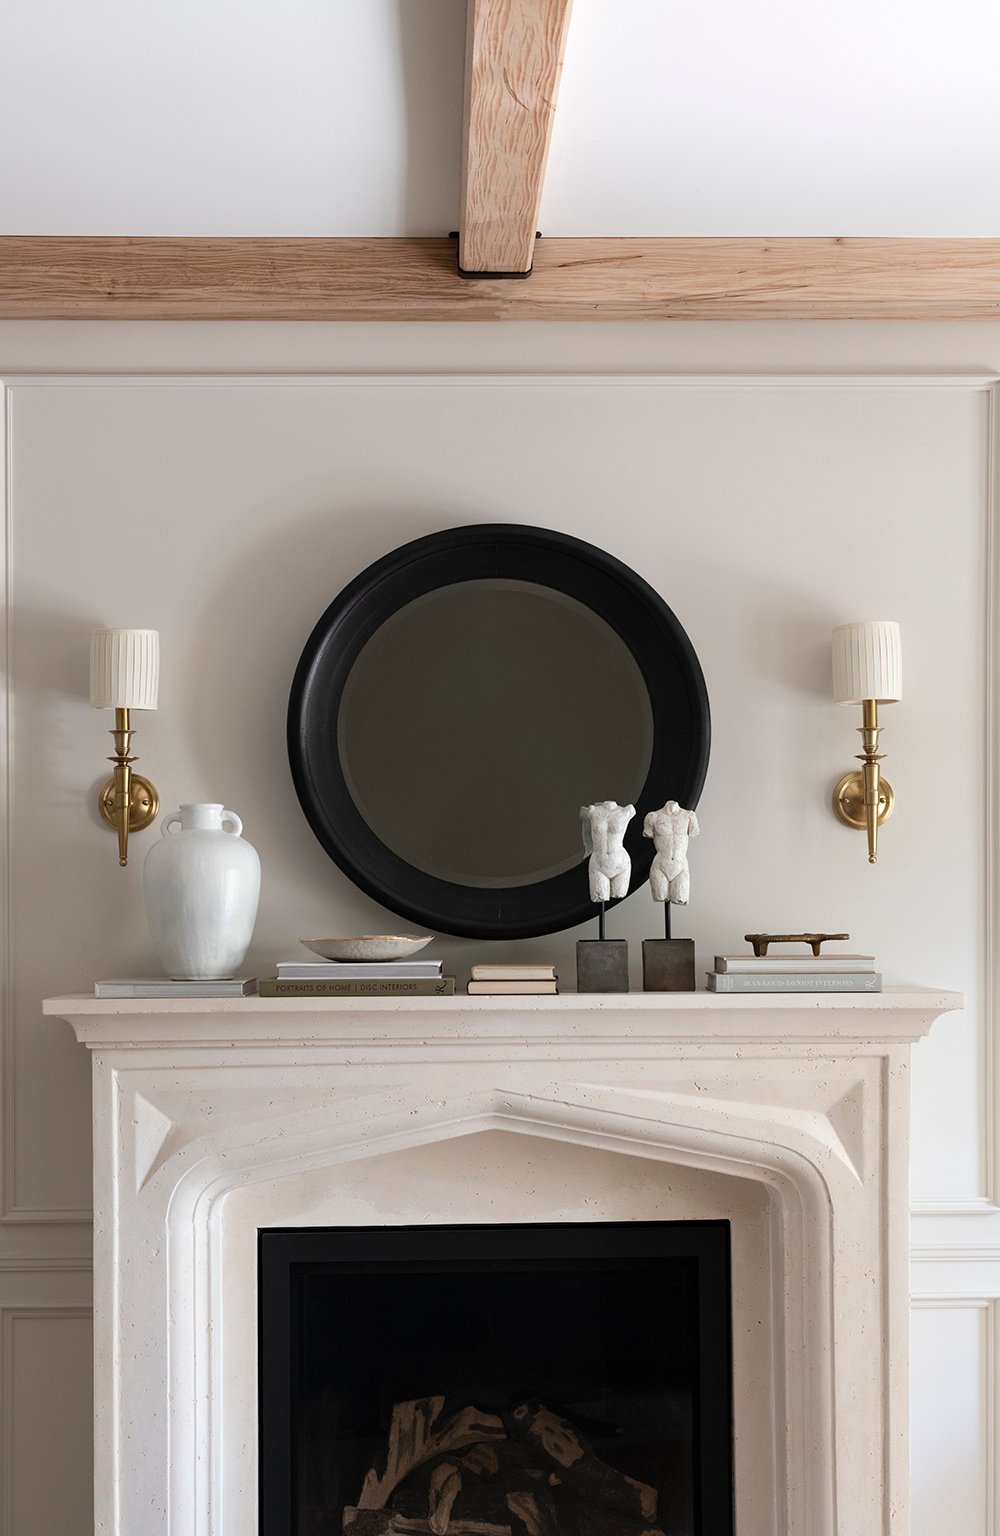 Mantel Styling Tips + 5 Looks - roomfortuesday.com